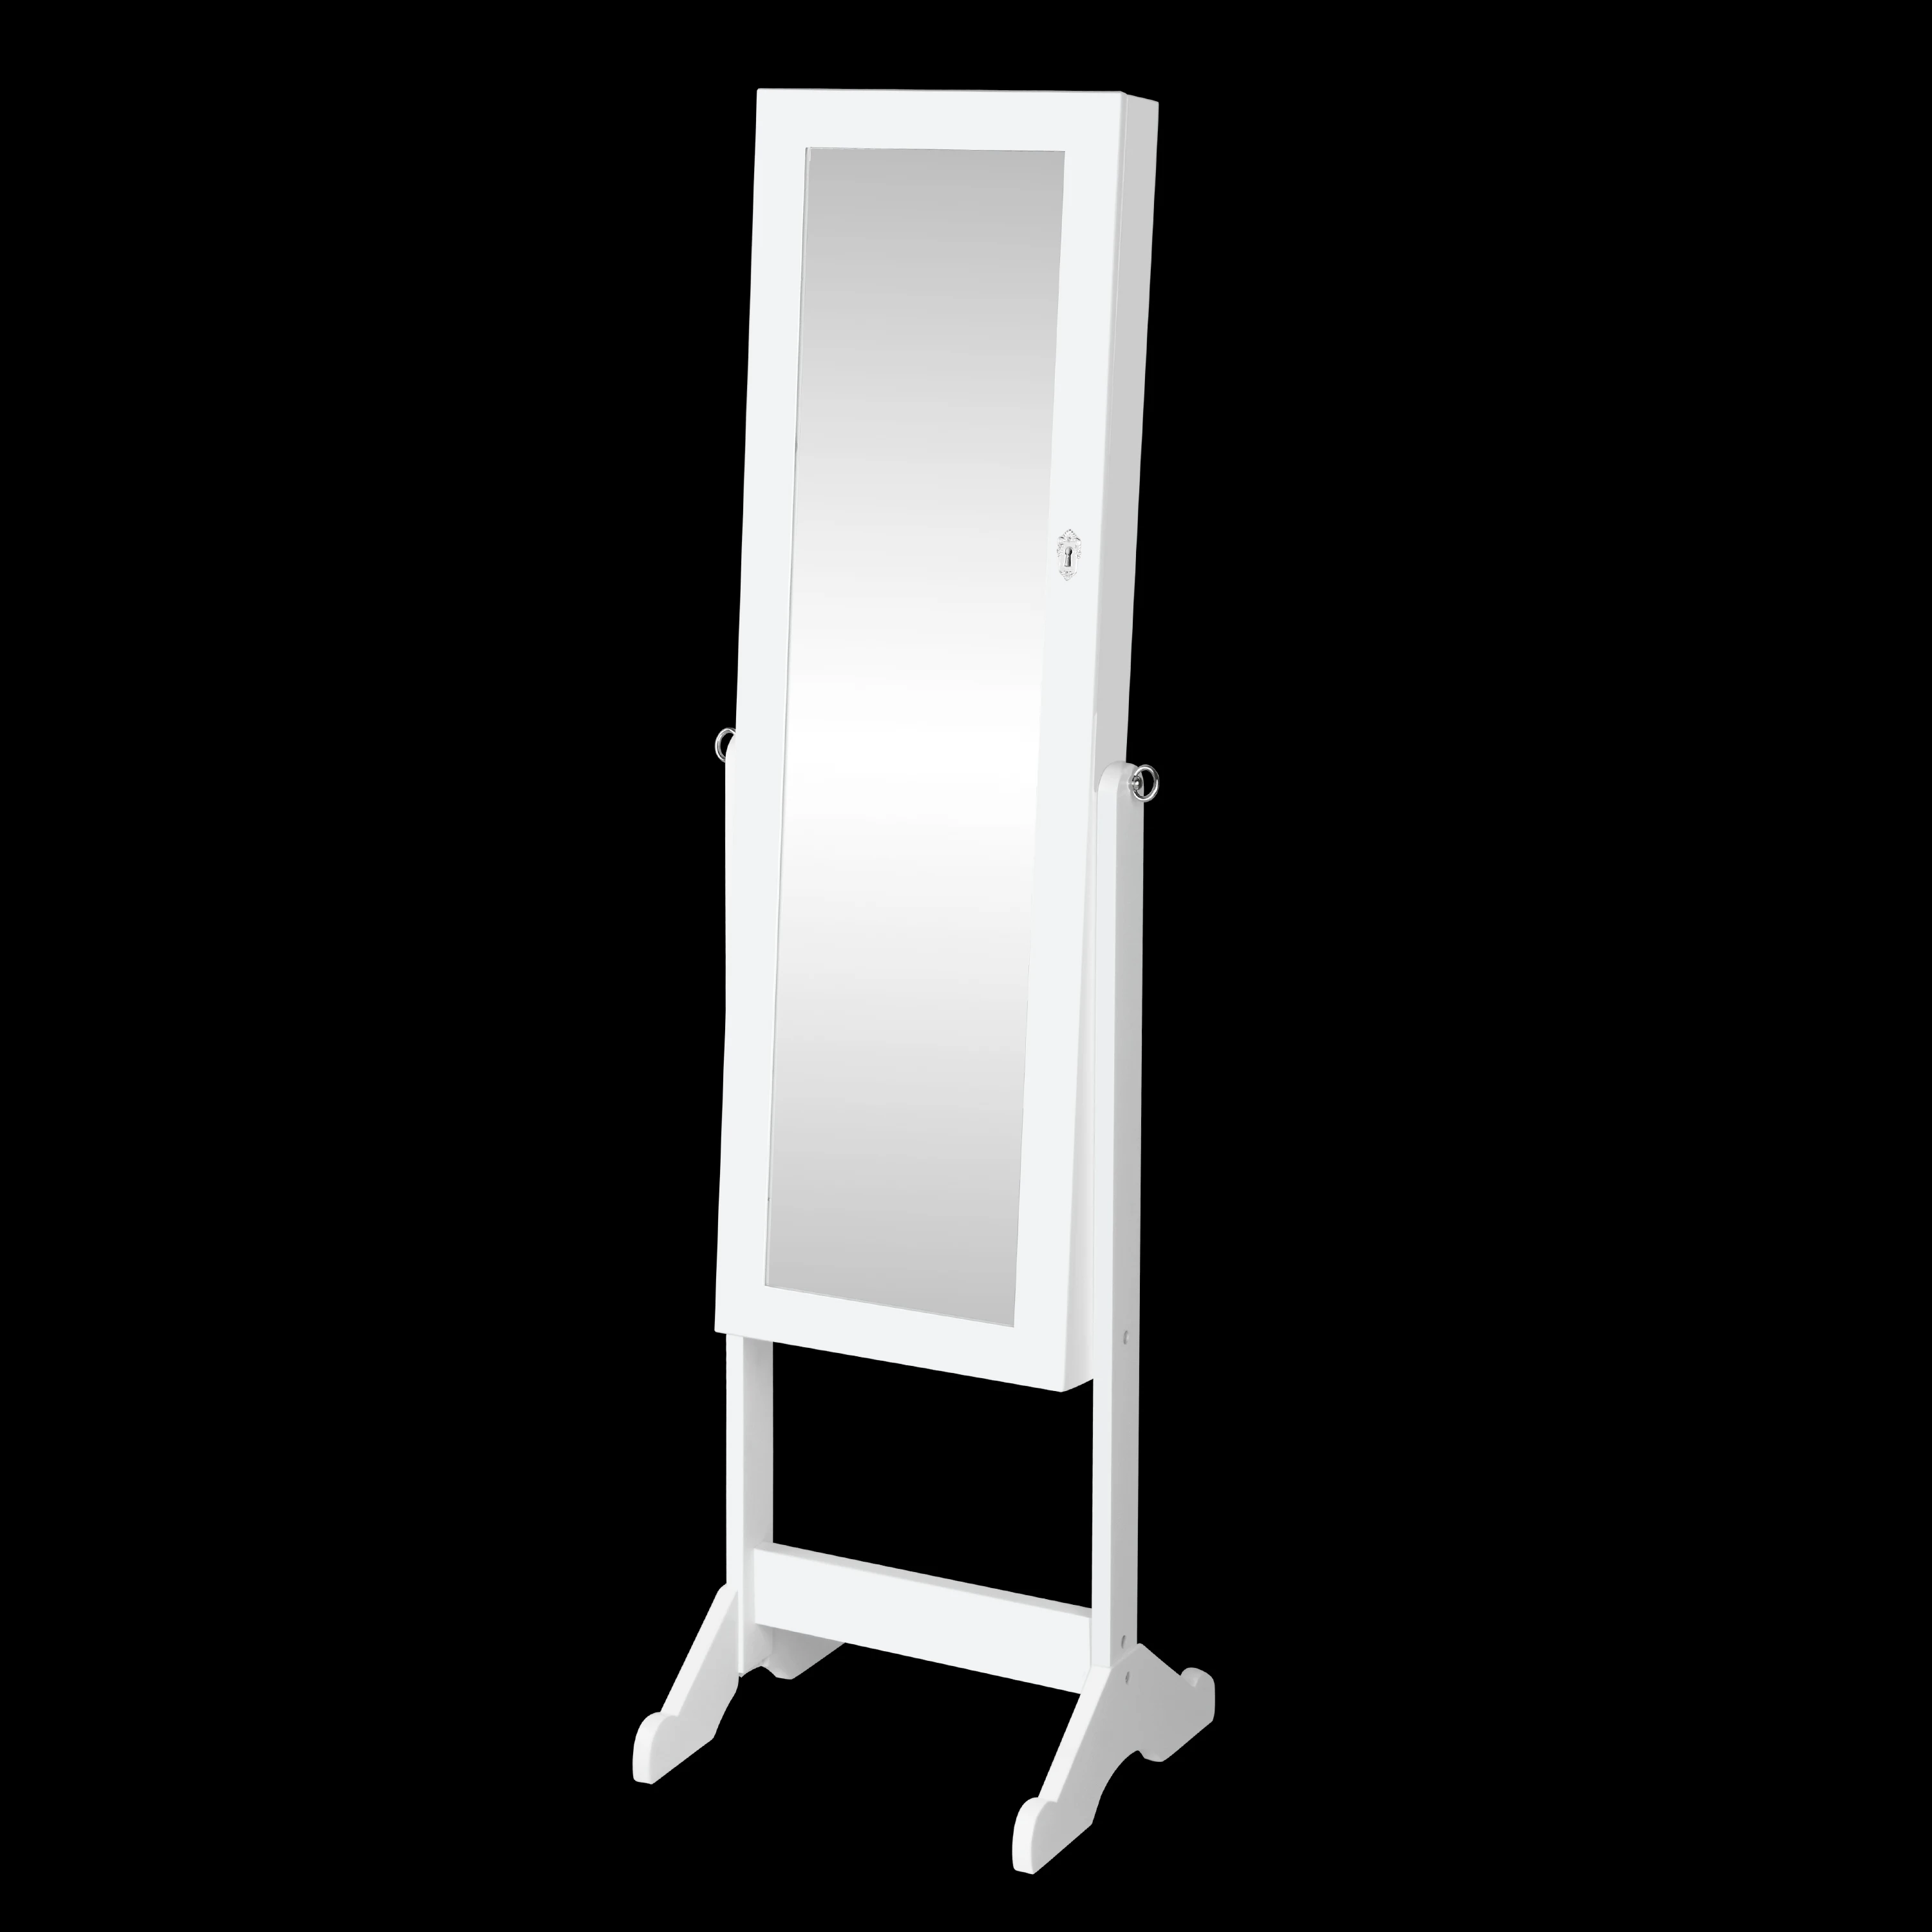 Easygoing use Influential Flat Angle Mdf Wood Floor Standing Jewelry Cabinet Mirror With Lock  Full-length Mirror With Storage Box White Black - Buy Wooden Jewelery  Cabinet Mirror Two In One With Lock Makeup Organizer Jewelry